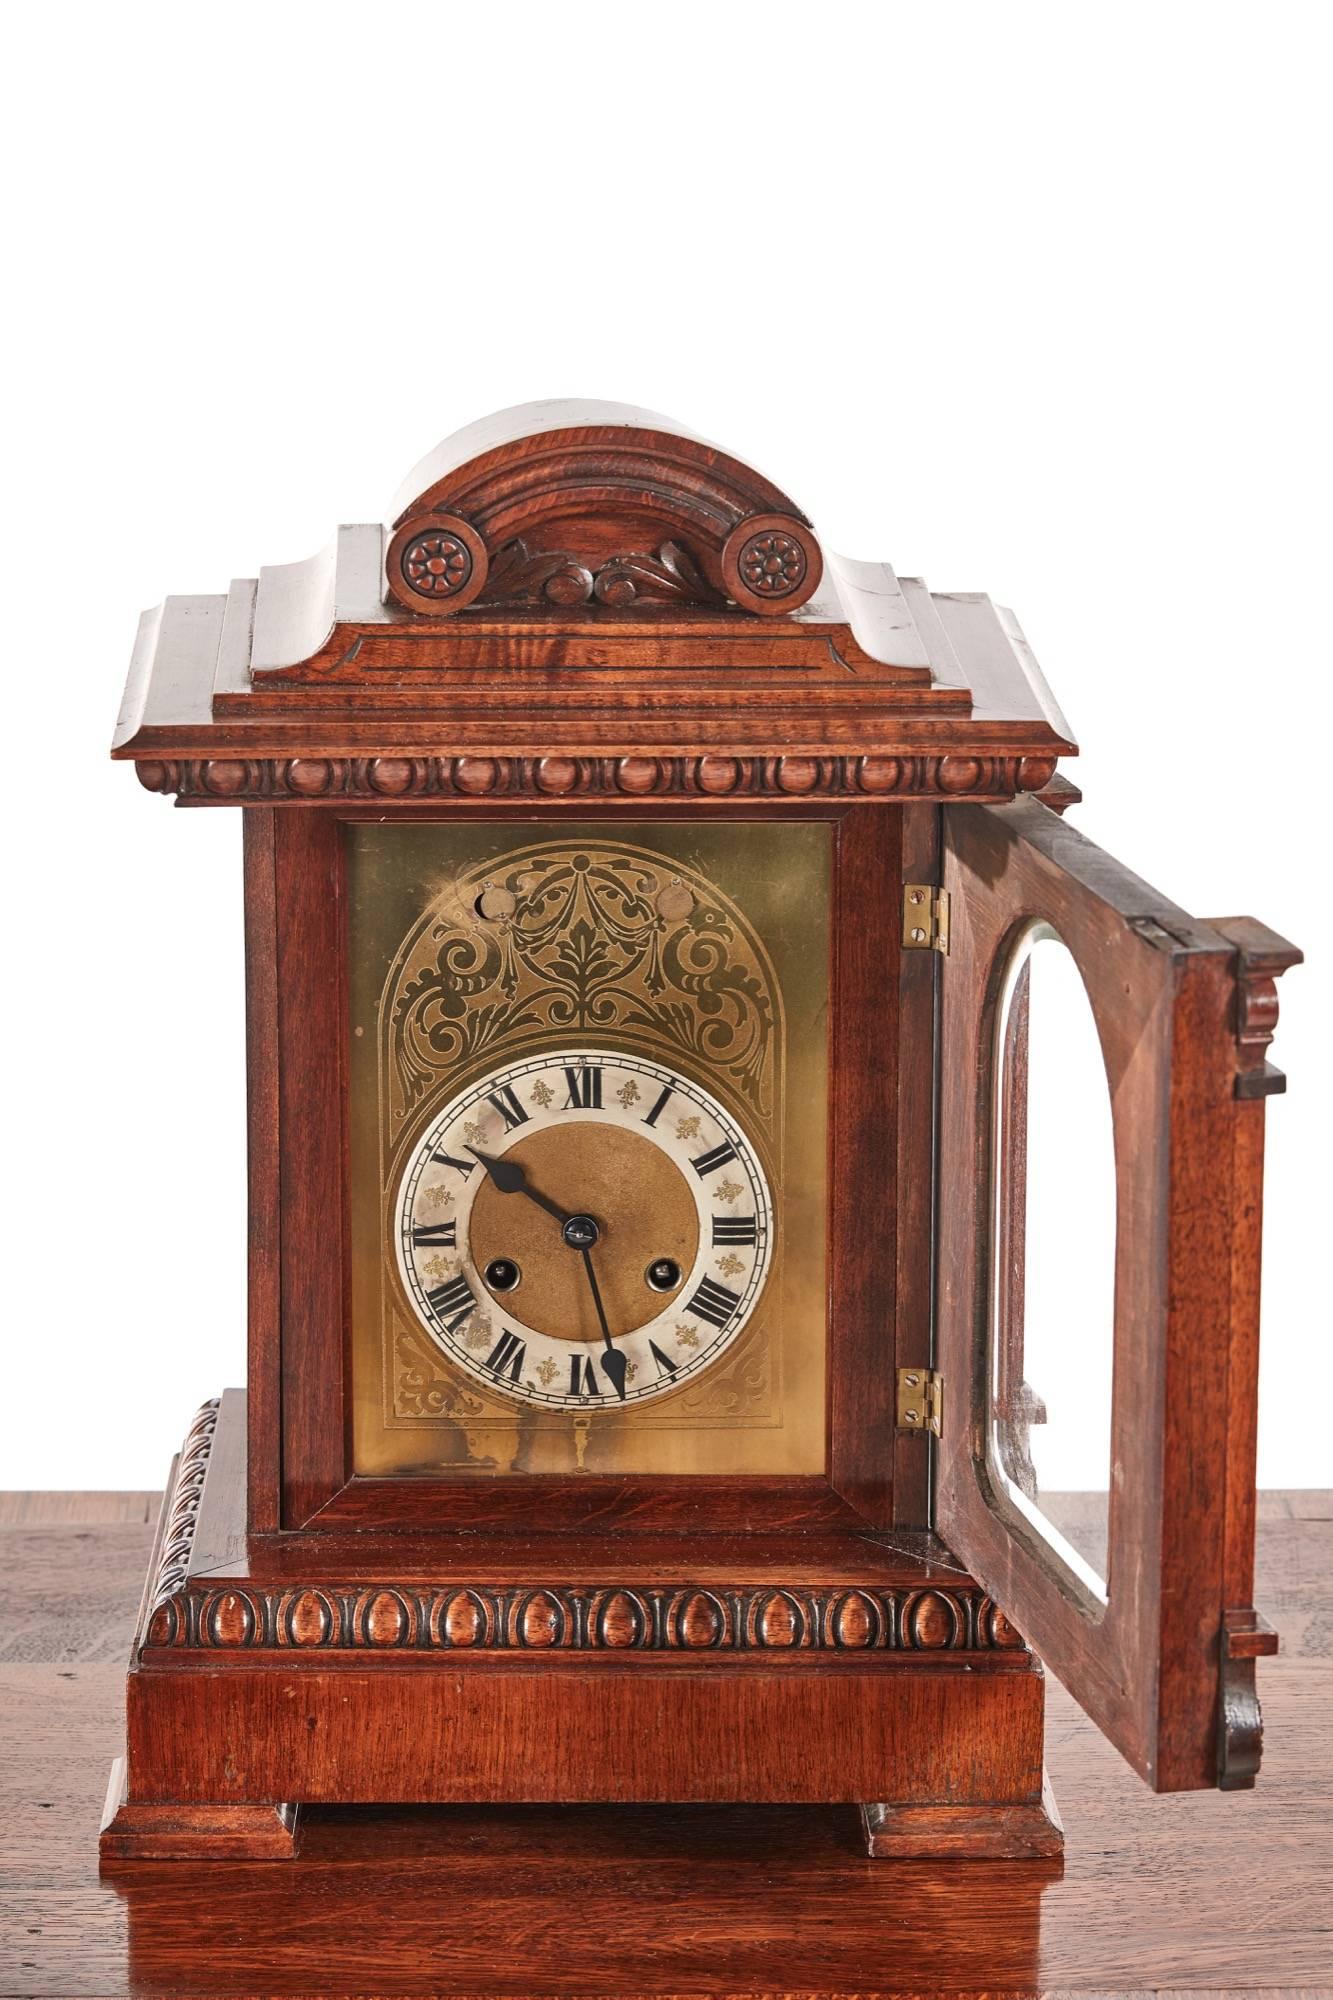 Antique carved walnut mantel clock, of architectural style with an arched pediment, the dial flanked by Corinthian columns above a carved frieze and plinth base, the brass and silver dial with roman numerals,8 day chiming movement signed [junghans]